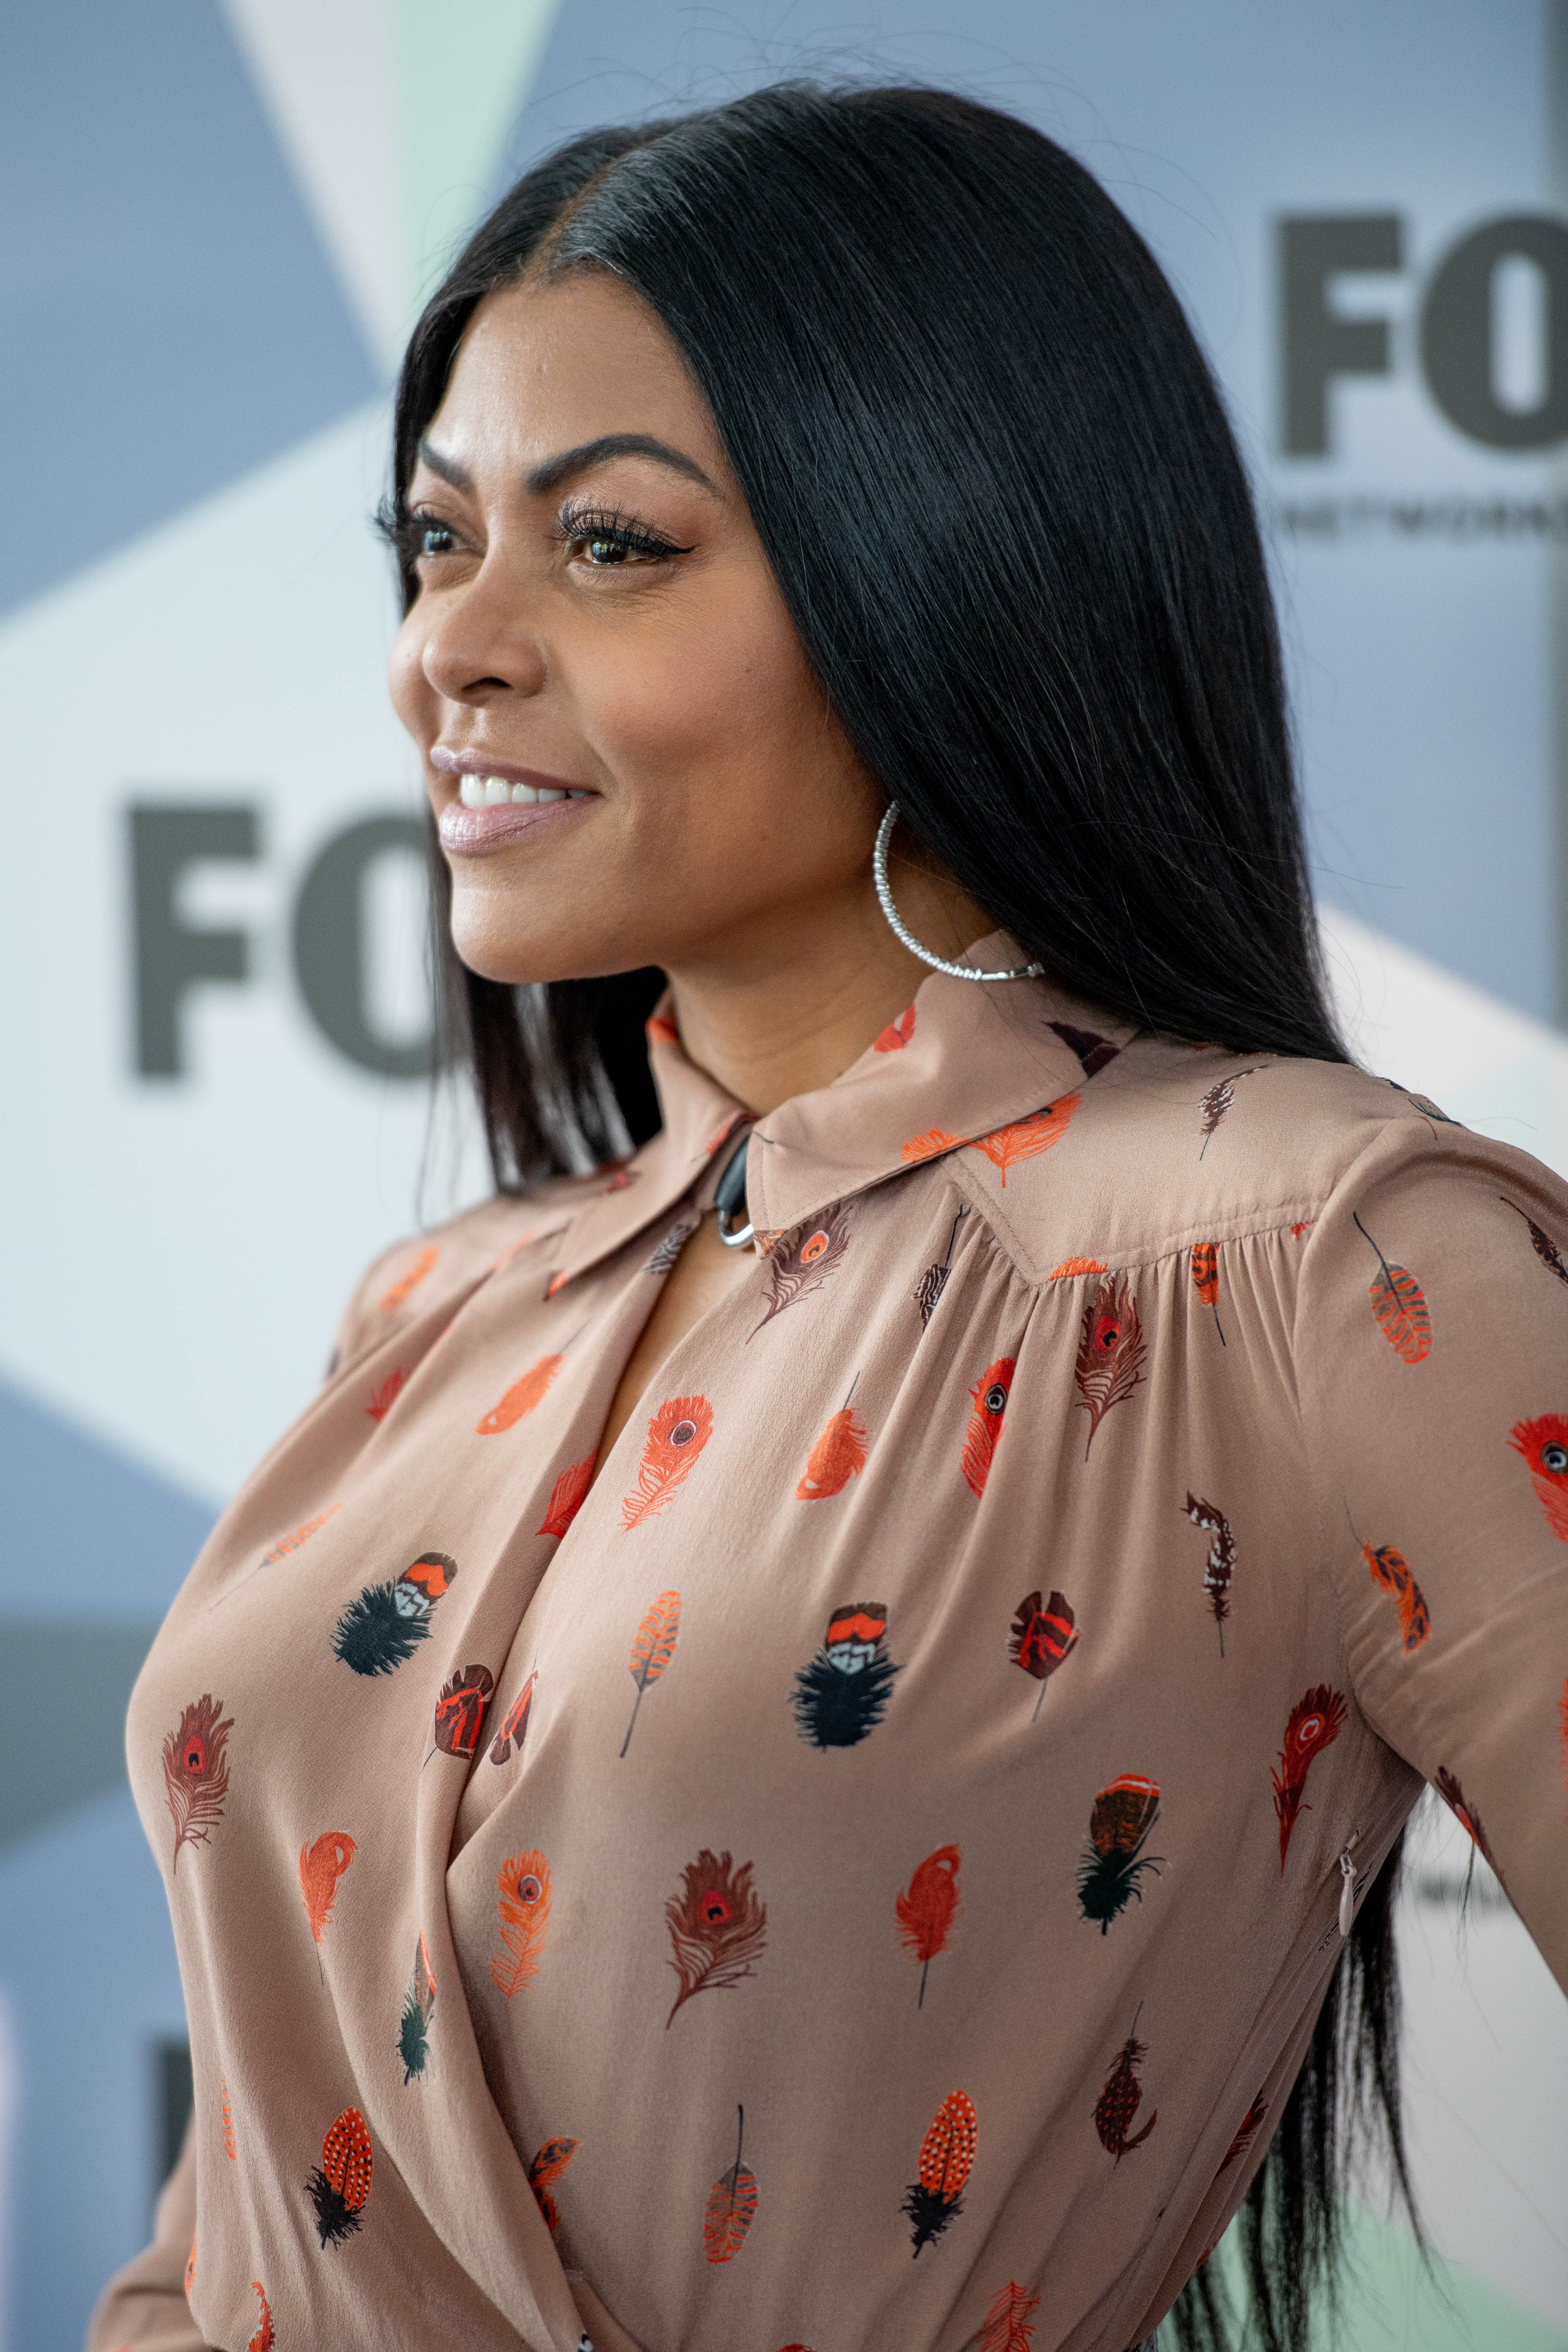 Taraji P. Henson at the 2018 Fox Network Upfront in May 2018. | Photo: Getty Images